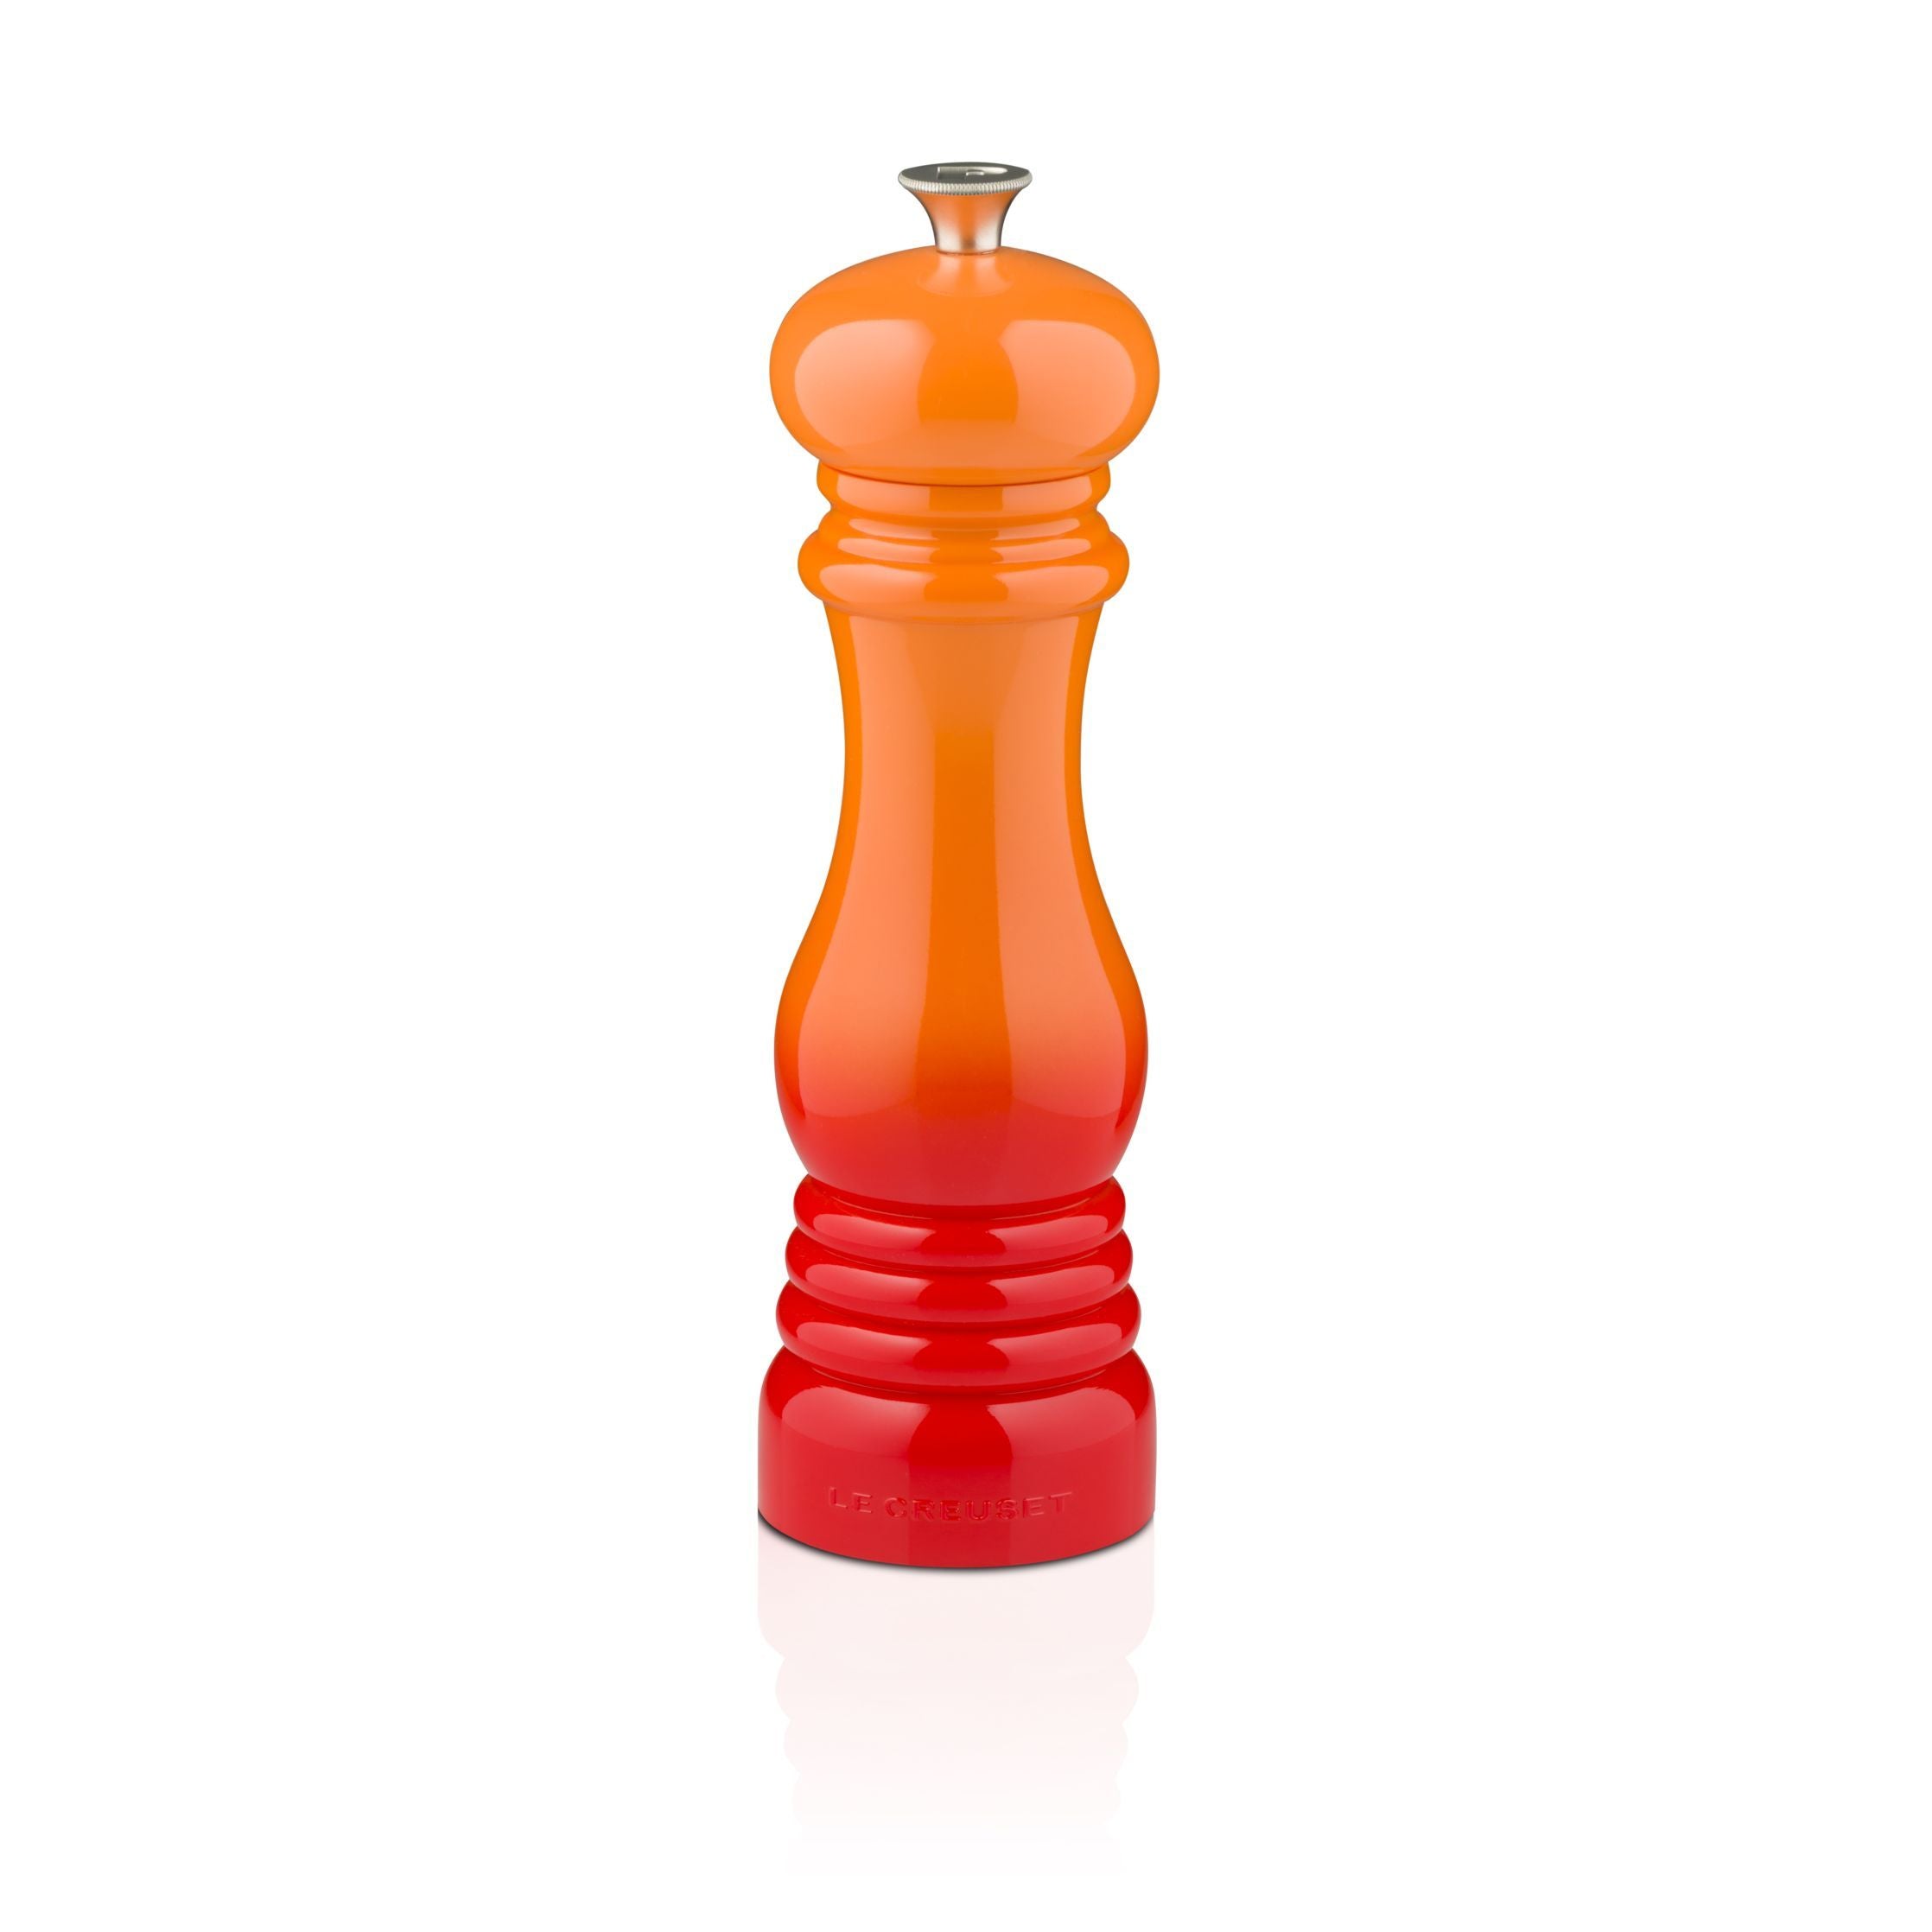 Le Creuset Pepper Mill 21厘米，烤箱红